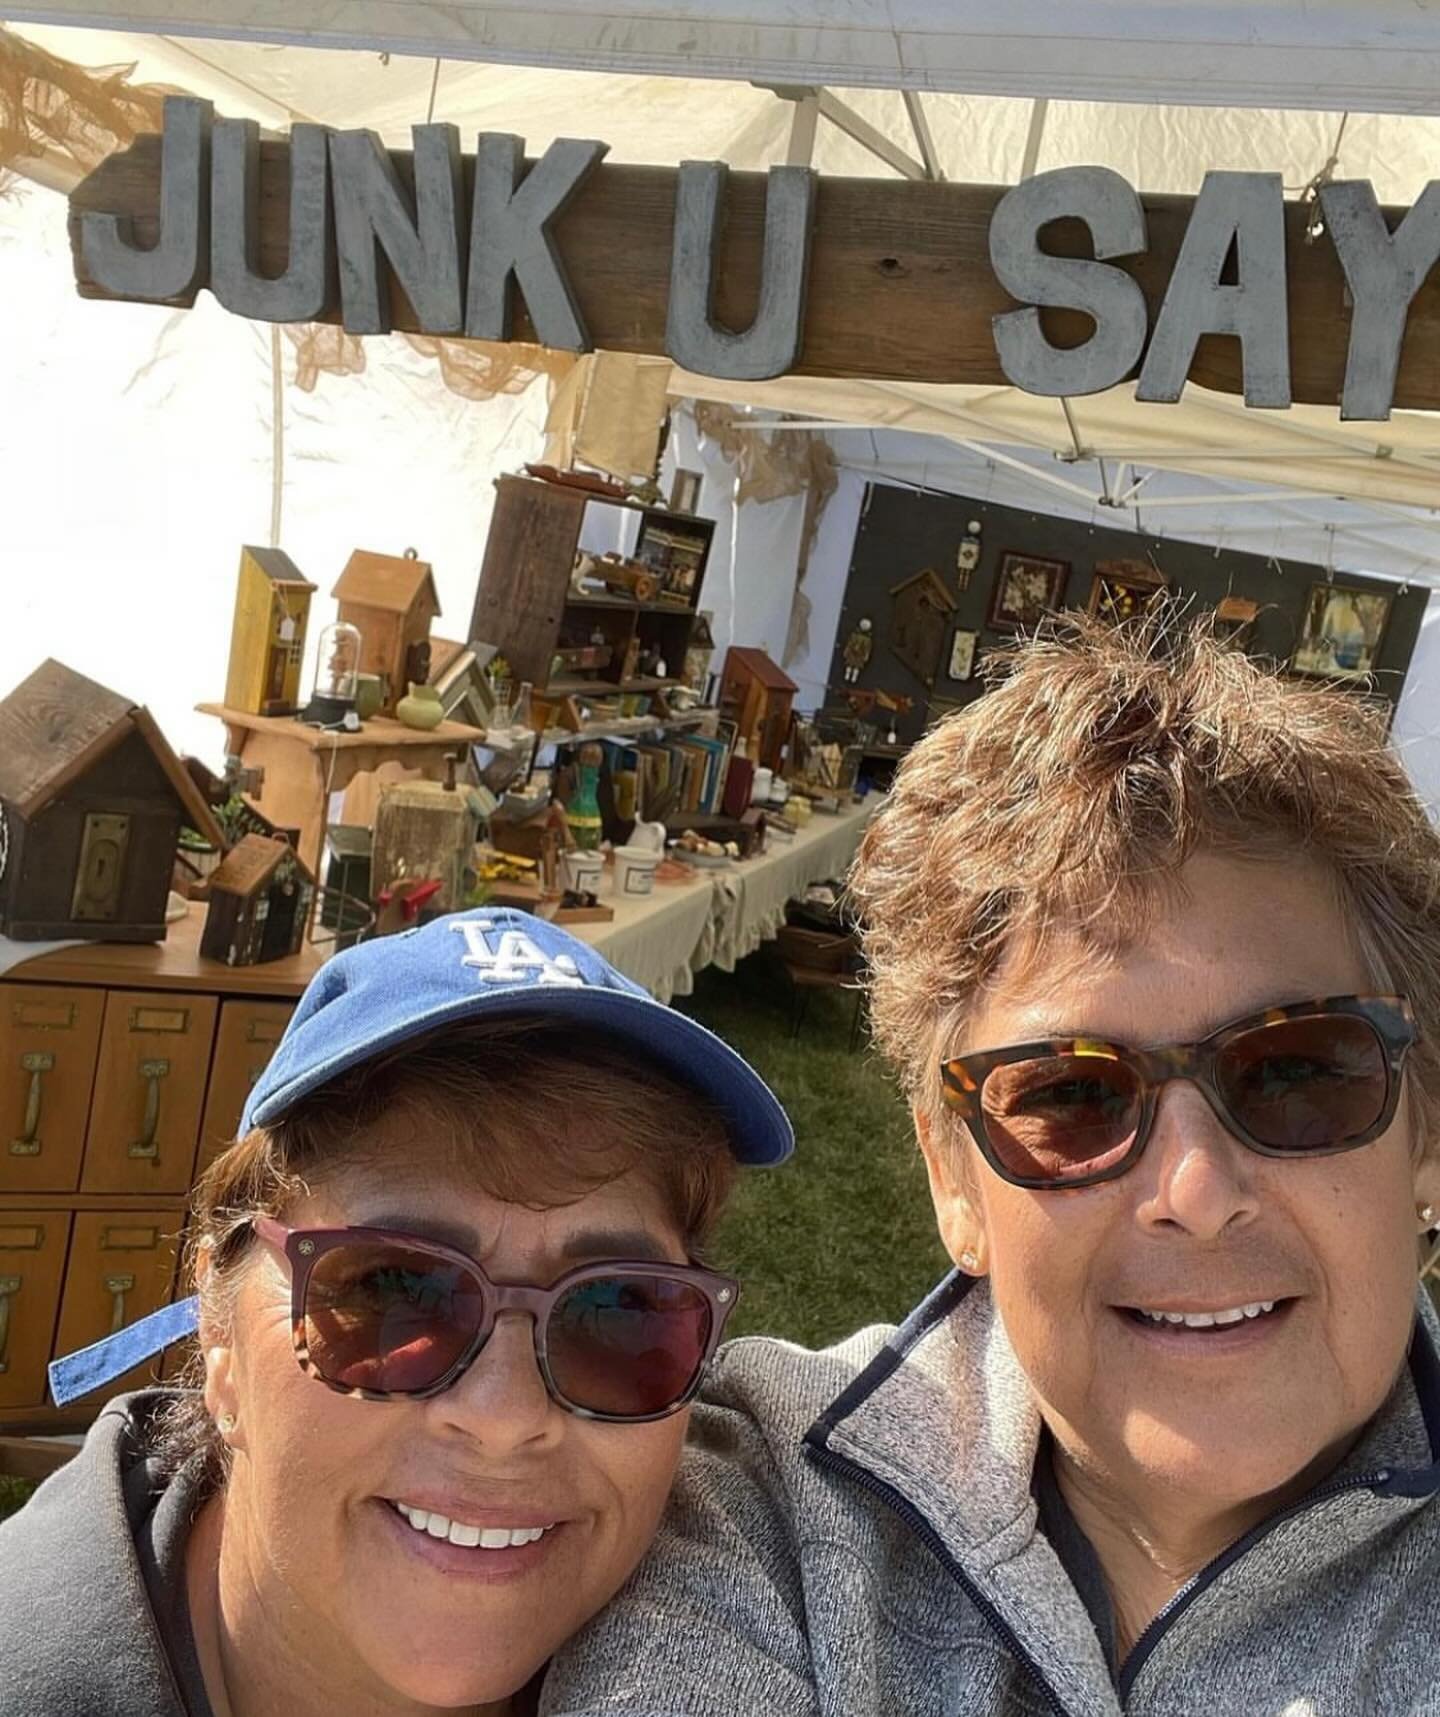 @junk.u.say is an Old Town Flea classic! You don&rsquo;t want to miss shopping this small business in just a few weeks, there are always treasures just waiting to be claimed ✨